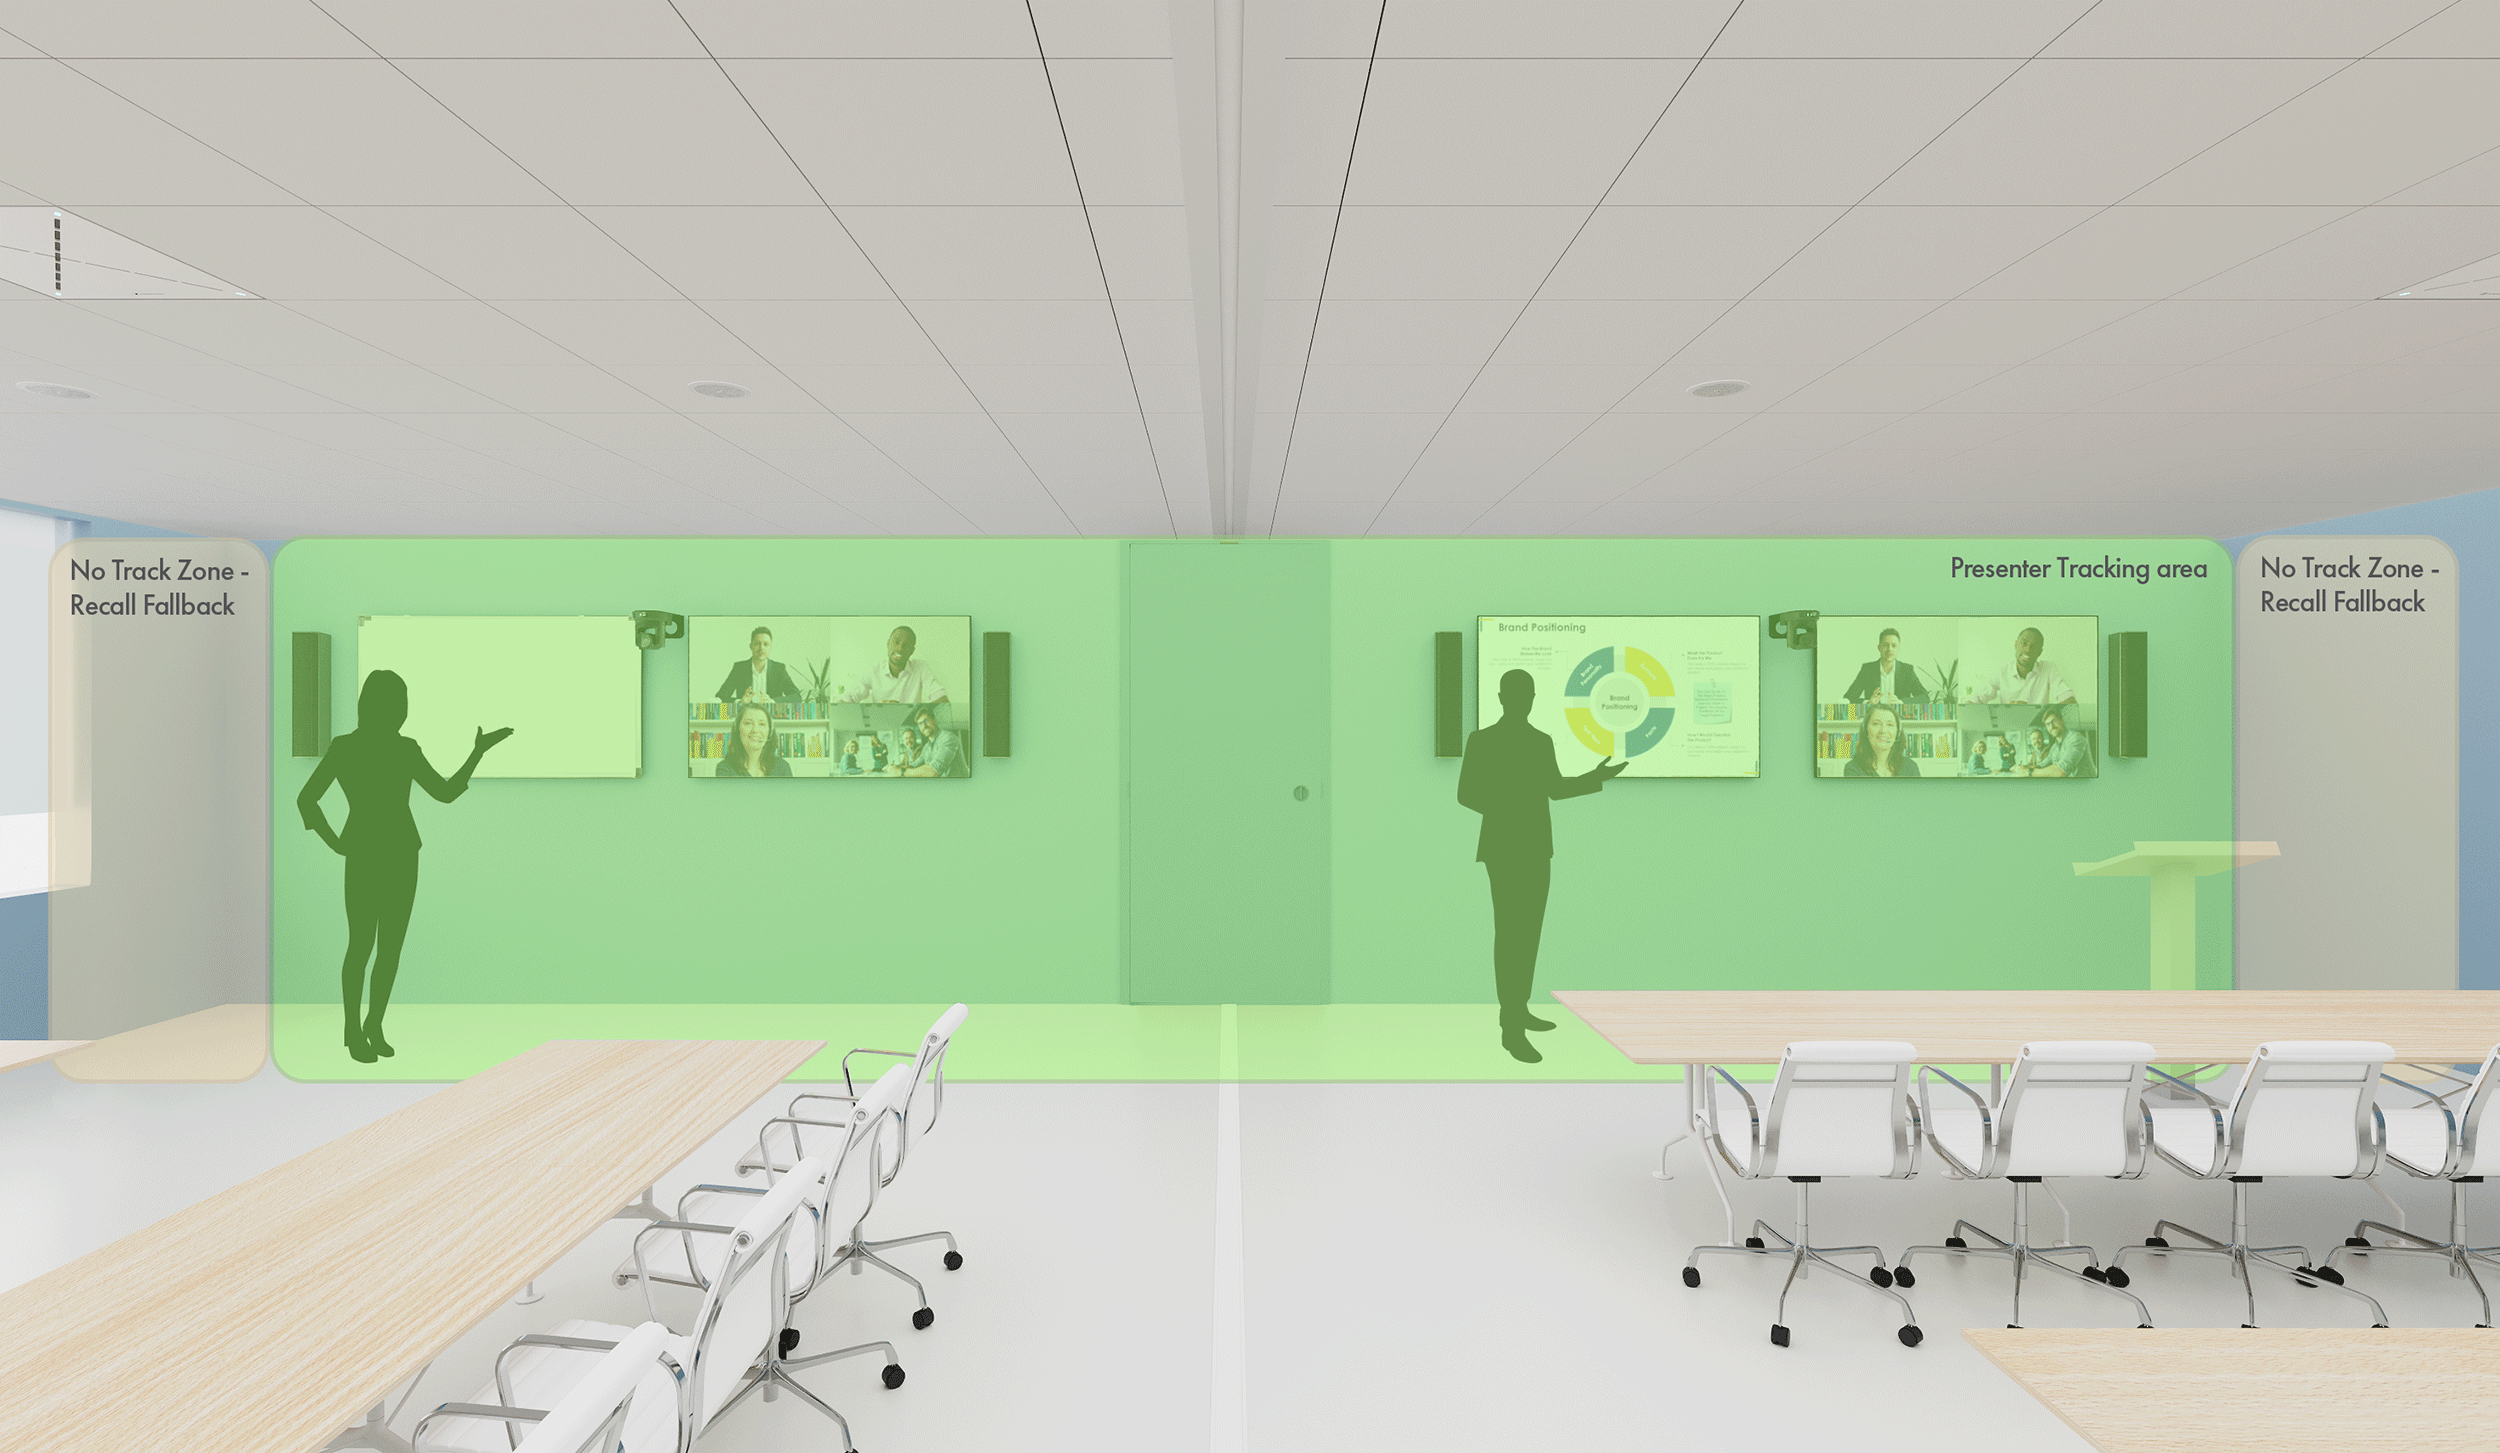 Gif of a room with two presenters being divided into two individual rooms, with the presenter tracking area highlighted